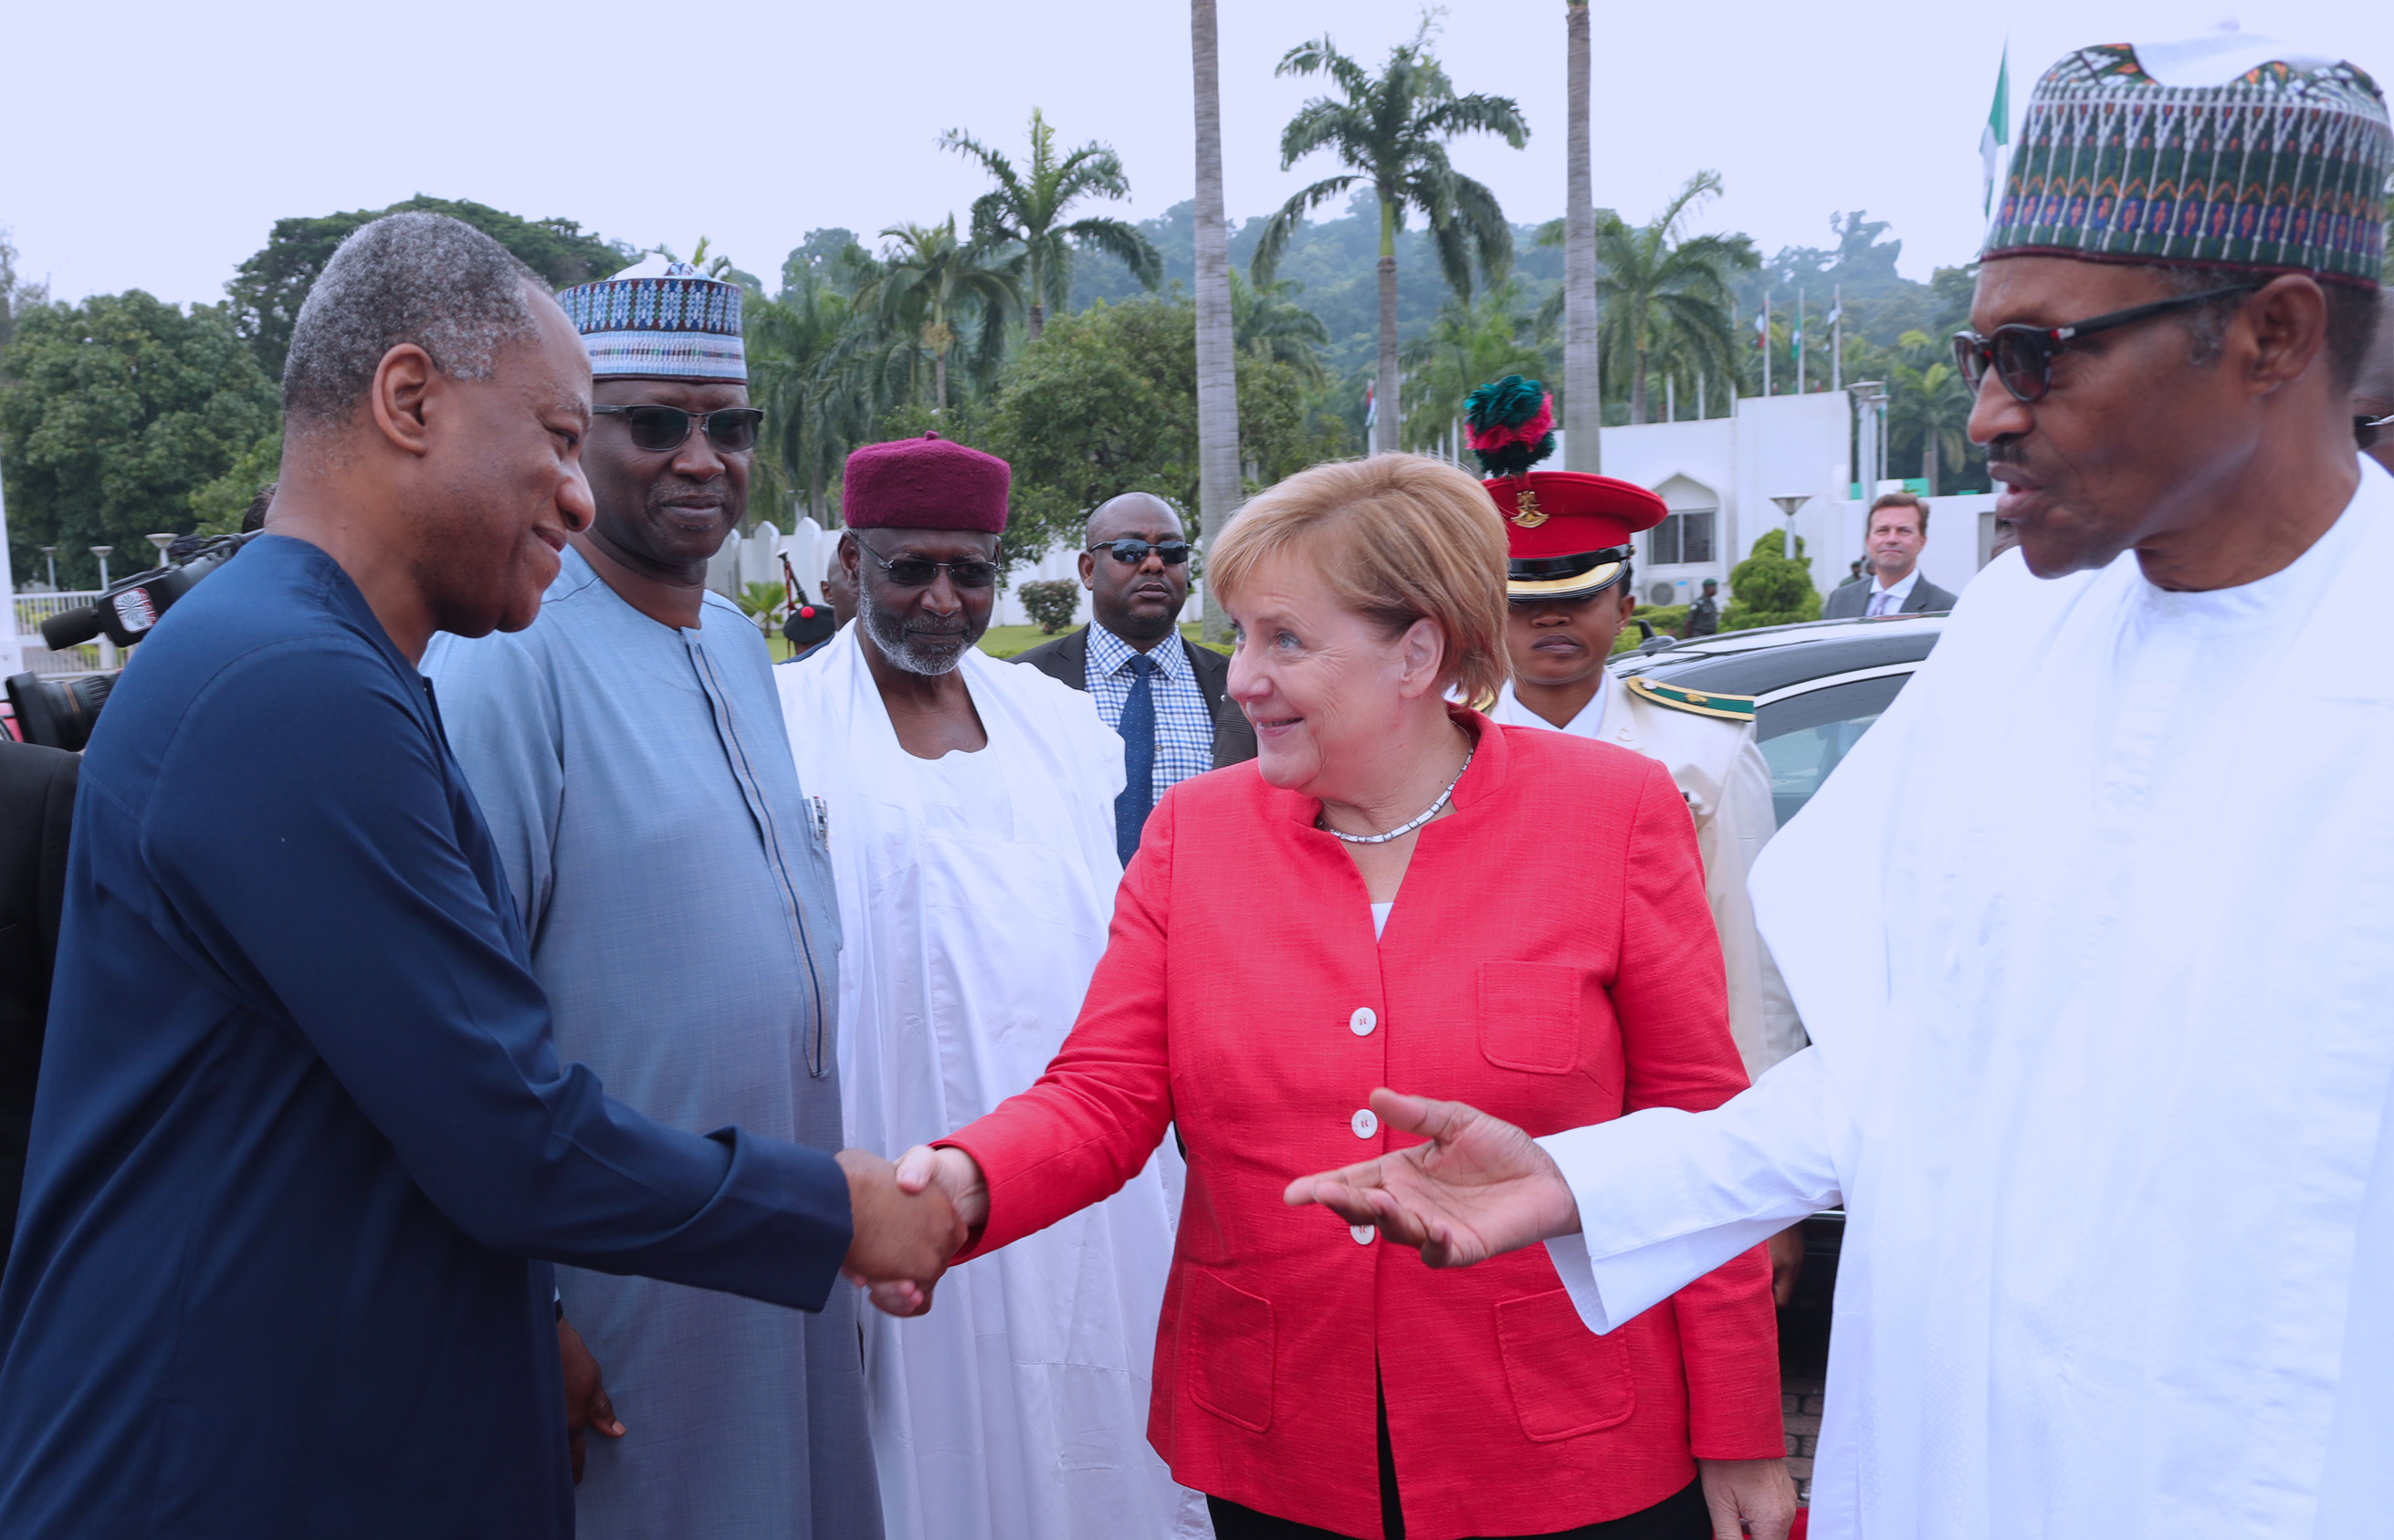 PRESIDENT BUHARI RECEIVES ANGEL MERKEL 14. R-L; President Muhammadu Buhari, German Chancellor H.E Angela Merkel in a handshake with Minister of Foreign Affairs, Mr Geoffrey Onyeama, SGF, Mr. Boss Mustapha and Chief of Staff, Mallam Abba Kyari during an official visit by the German Chancellor to State House Abuja. PHOTO; SUNDAY AGHAEZE. AUGUST 31 2018